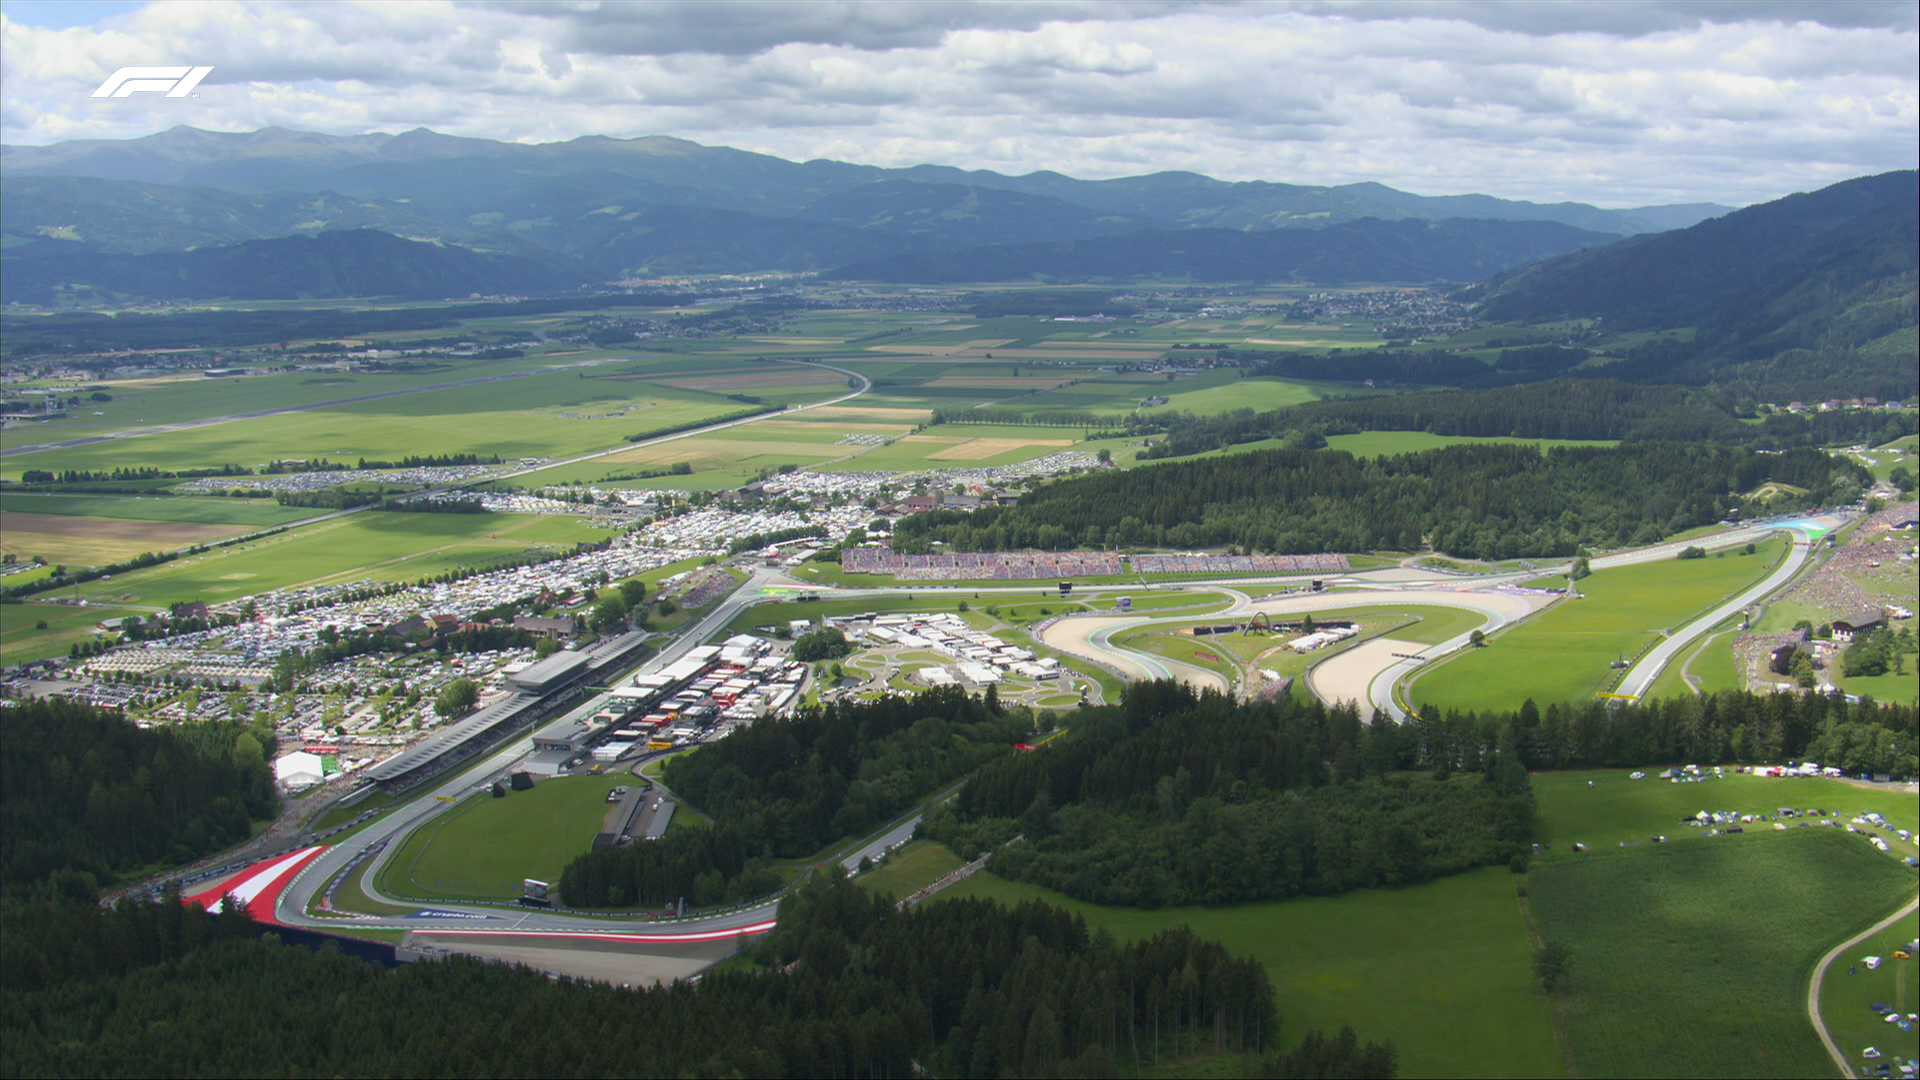 Austria GP 2023] - Key Facts, Schedules & Expected Weather :  r/Formula1RacingSeries